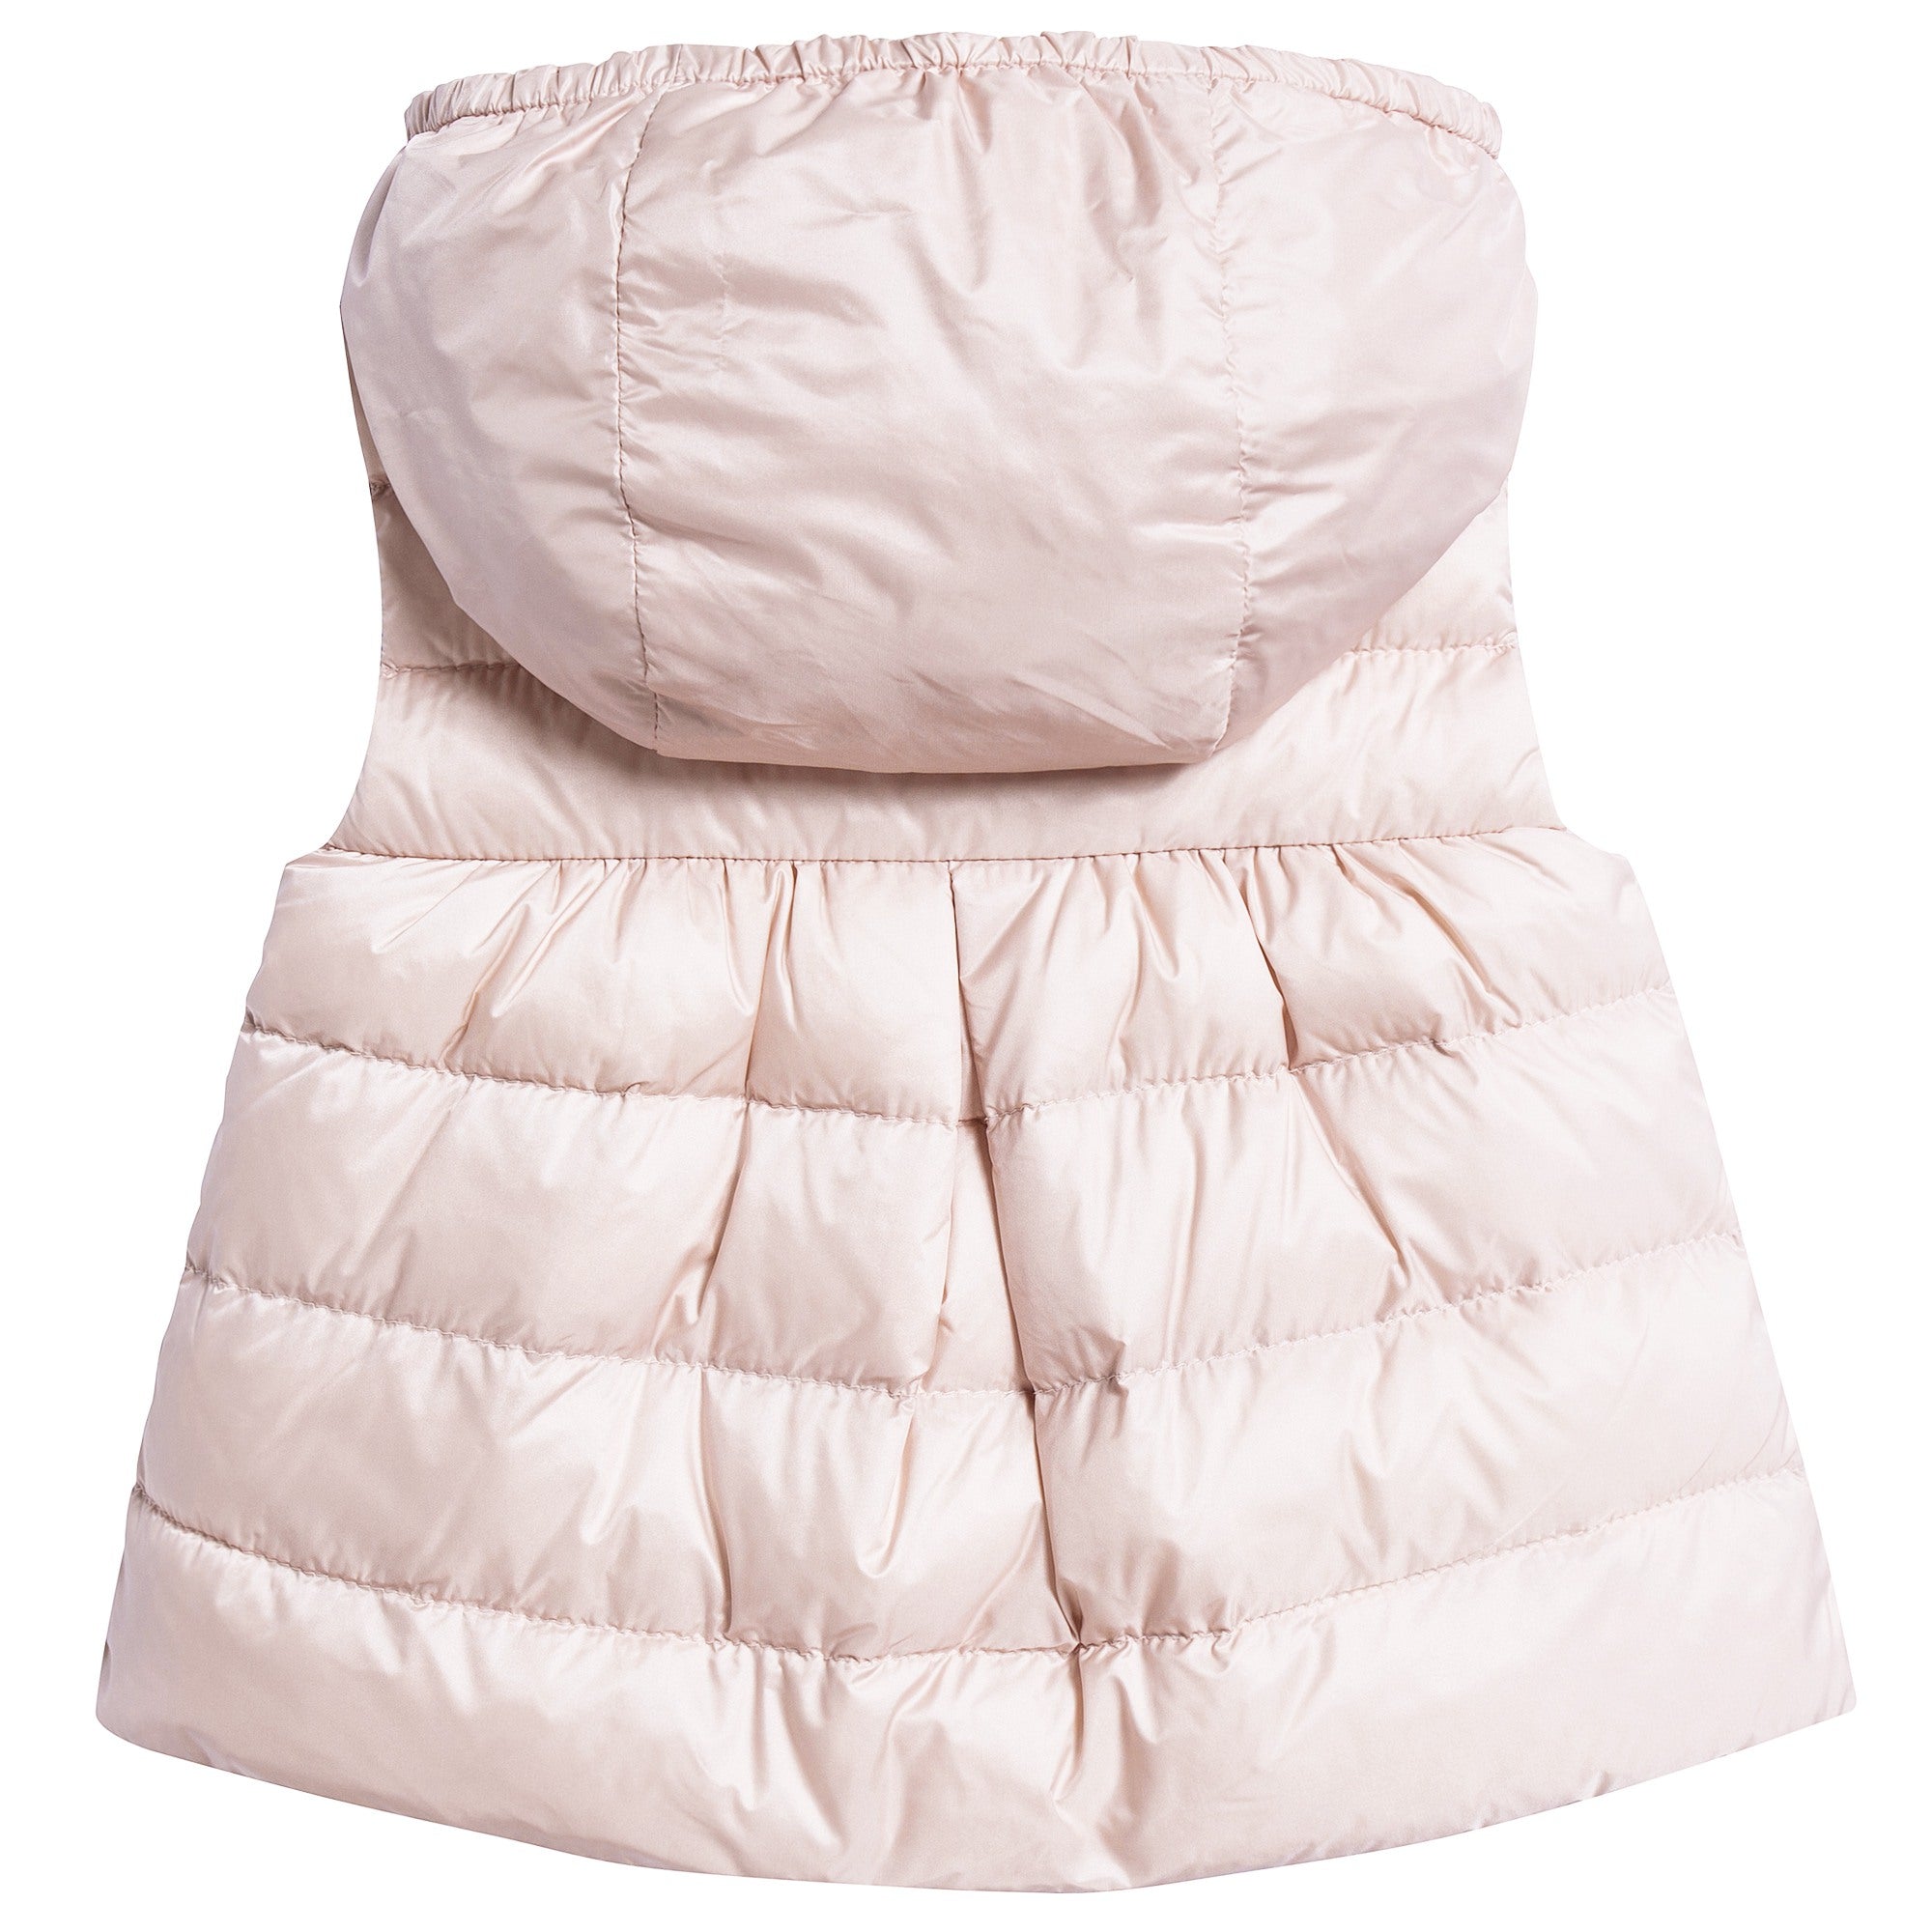 Baby Girls Pale Pink "New_Suzette" Gilet